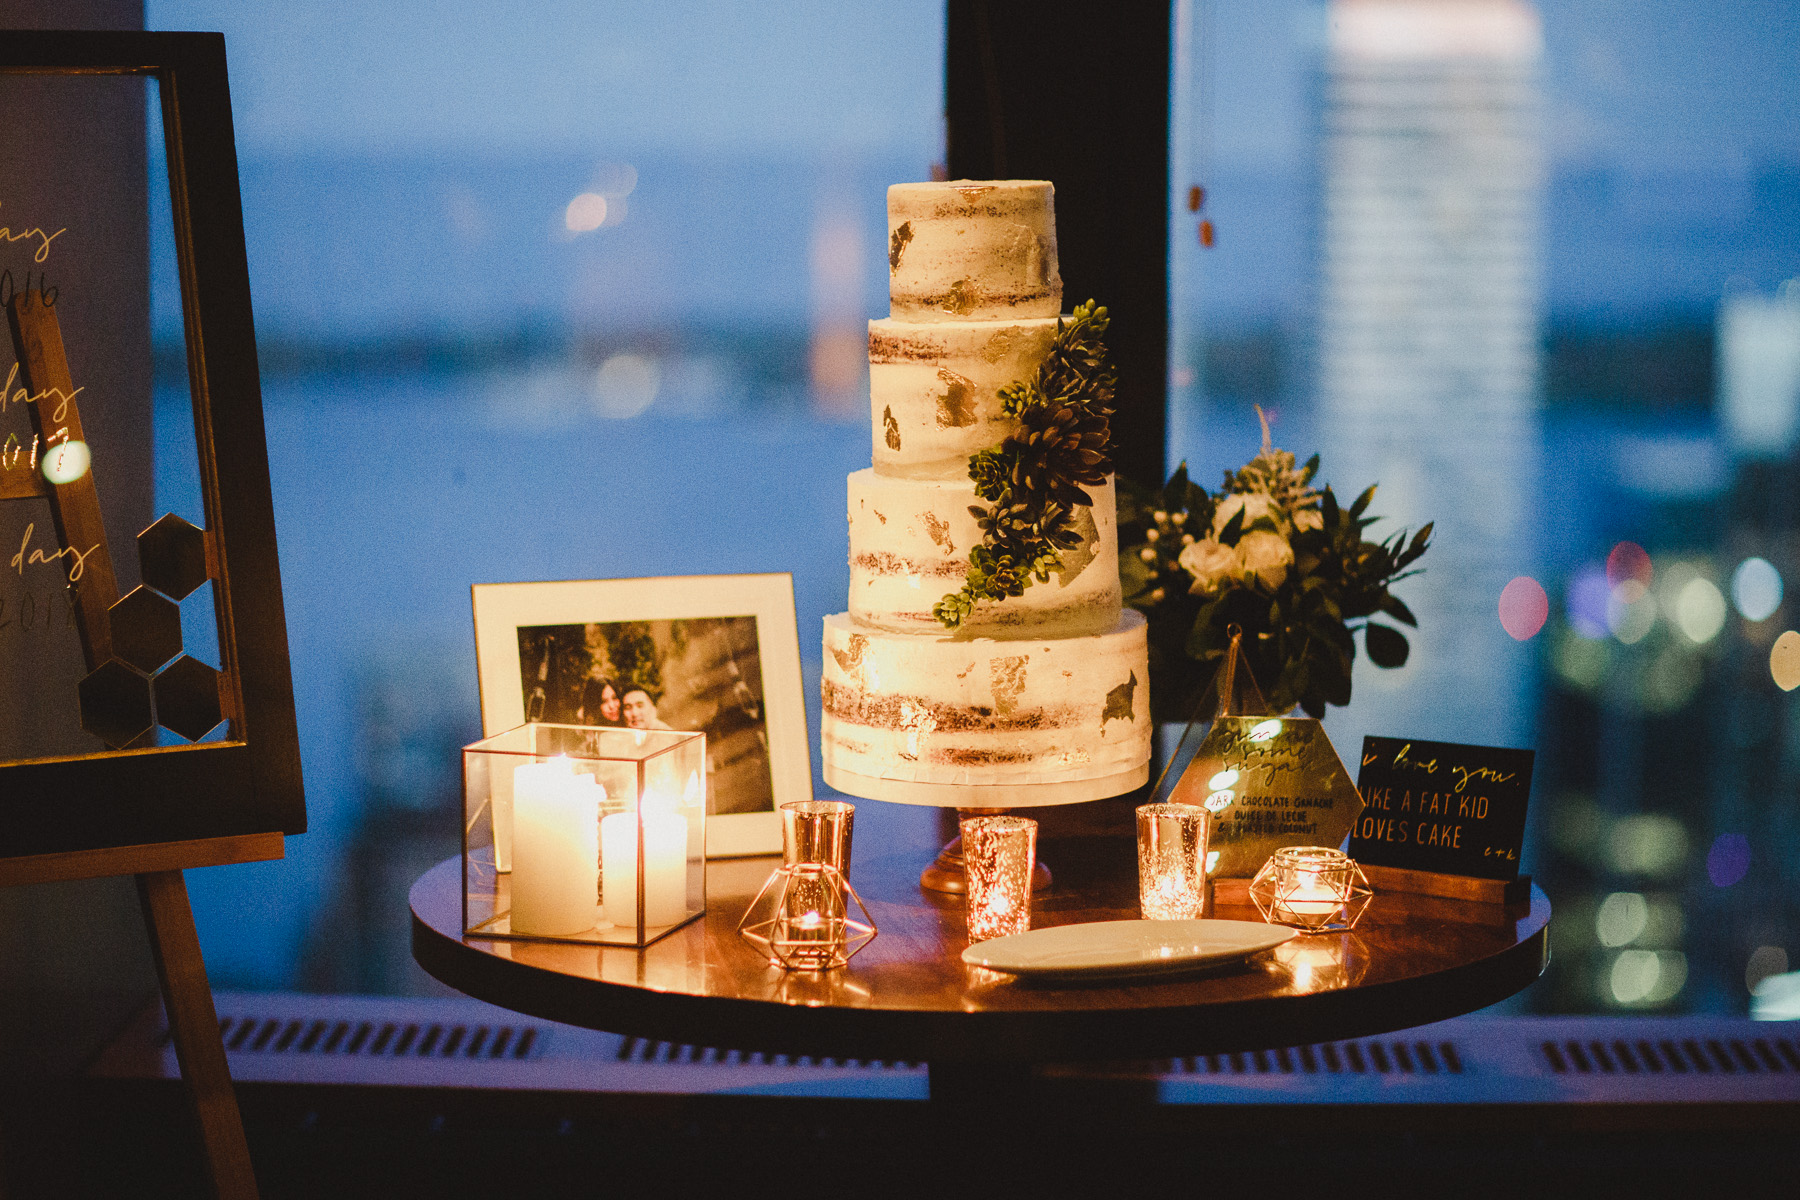 How to bake and decorate a wedding cake